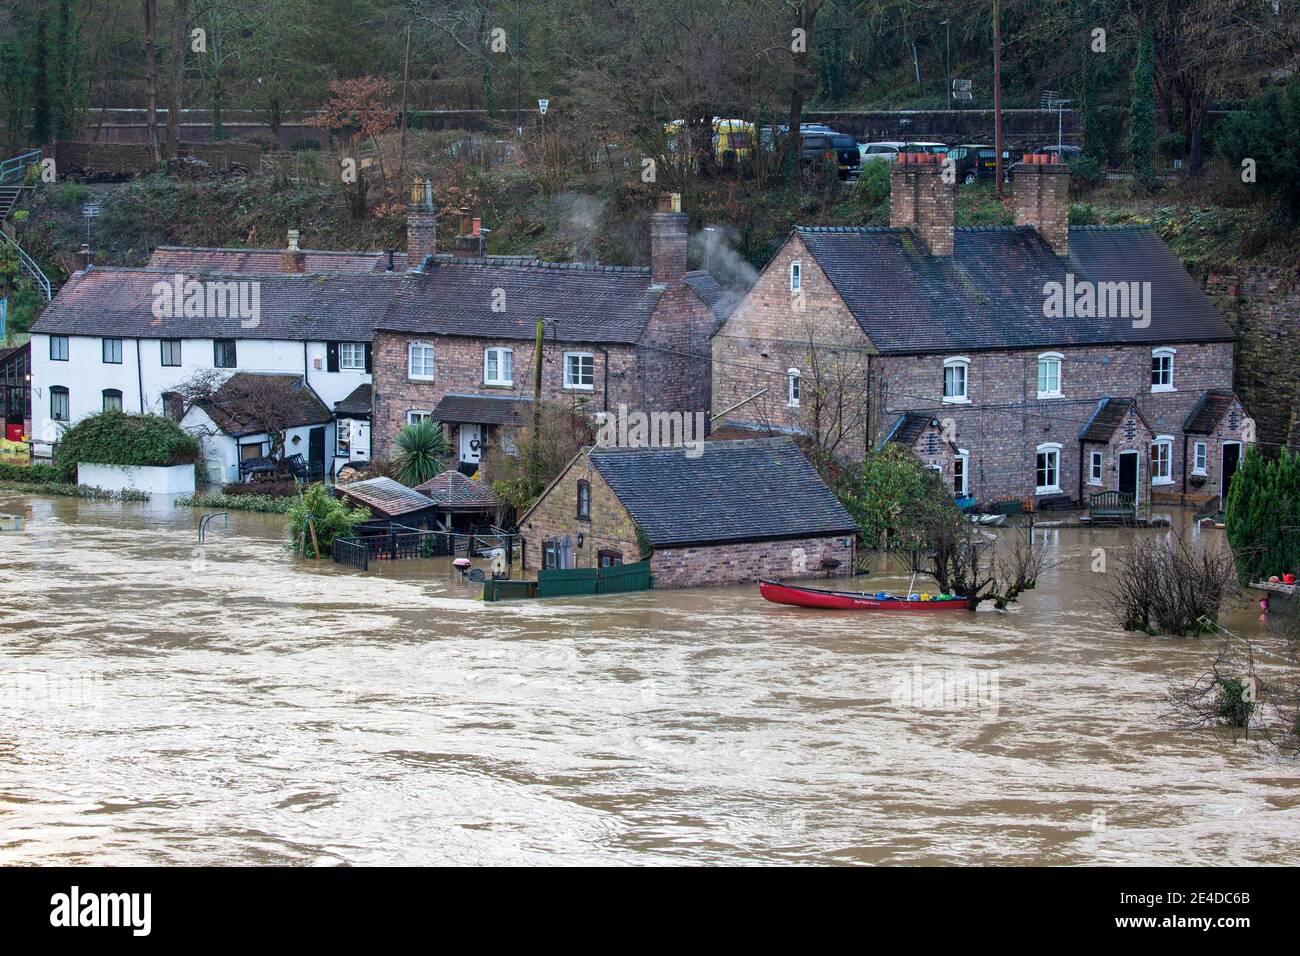 Shropshire, UK. 23rd Jan, 2021. Levels of the River Severn in Shropshire continued to rise overnight, causing severe floods in certain areas. Riverside houses are particularly vulnerable to flooding this time of year. Credit: Rob Carter/Alamy Live News Stock Photo